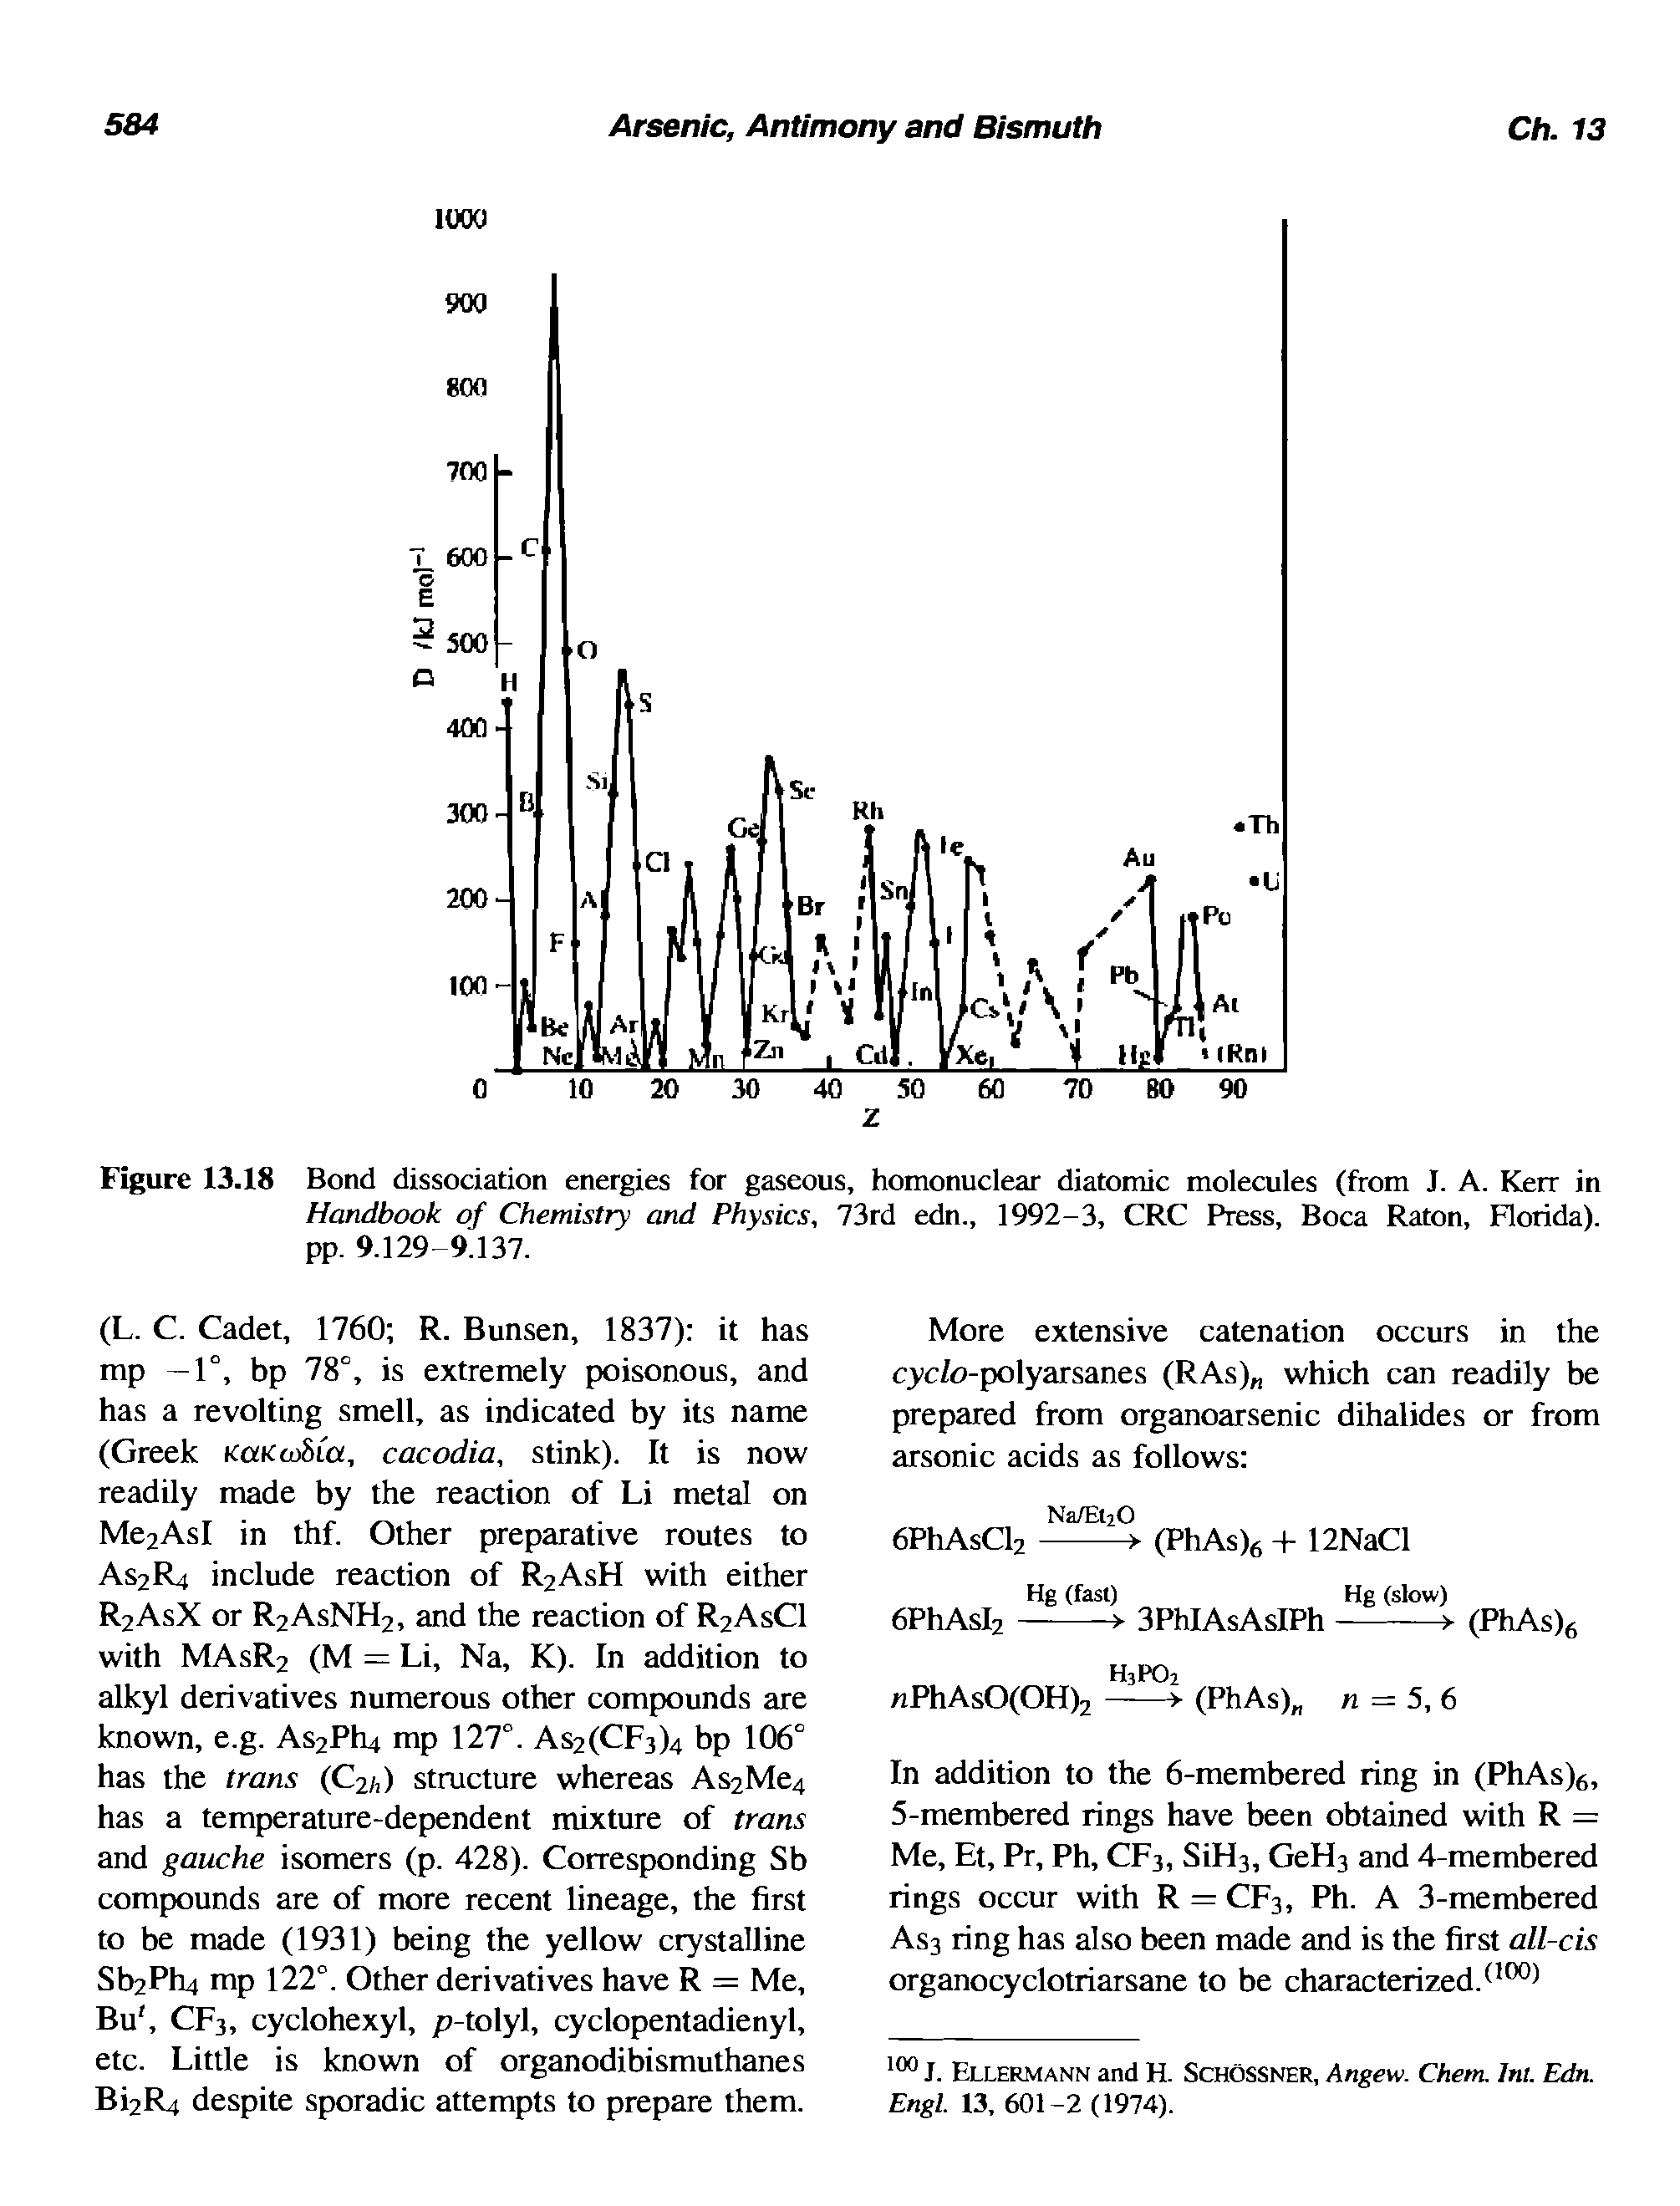 Figure 13.18 Bond dissociation energies for gaseous, homonuclear diatomic molecules (from J. A. Kerr in Handbook of Chemistry and Physics, 73rd edn., 1992-3, CRC Press, Boca Raton, Florida), pp. 9.129-9.137.